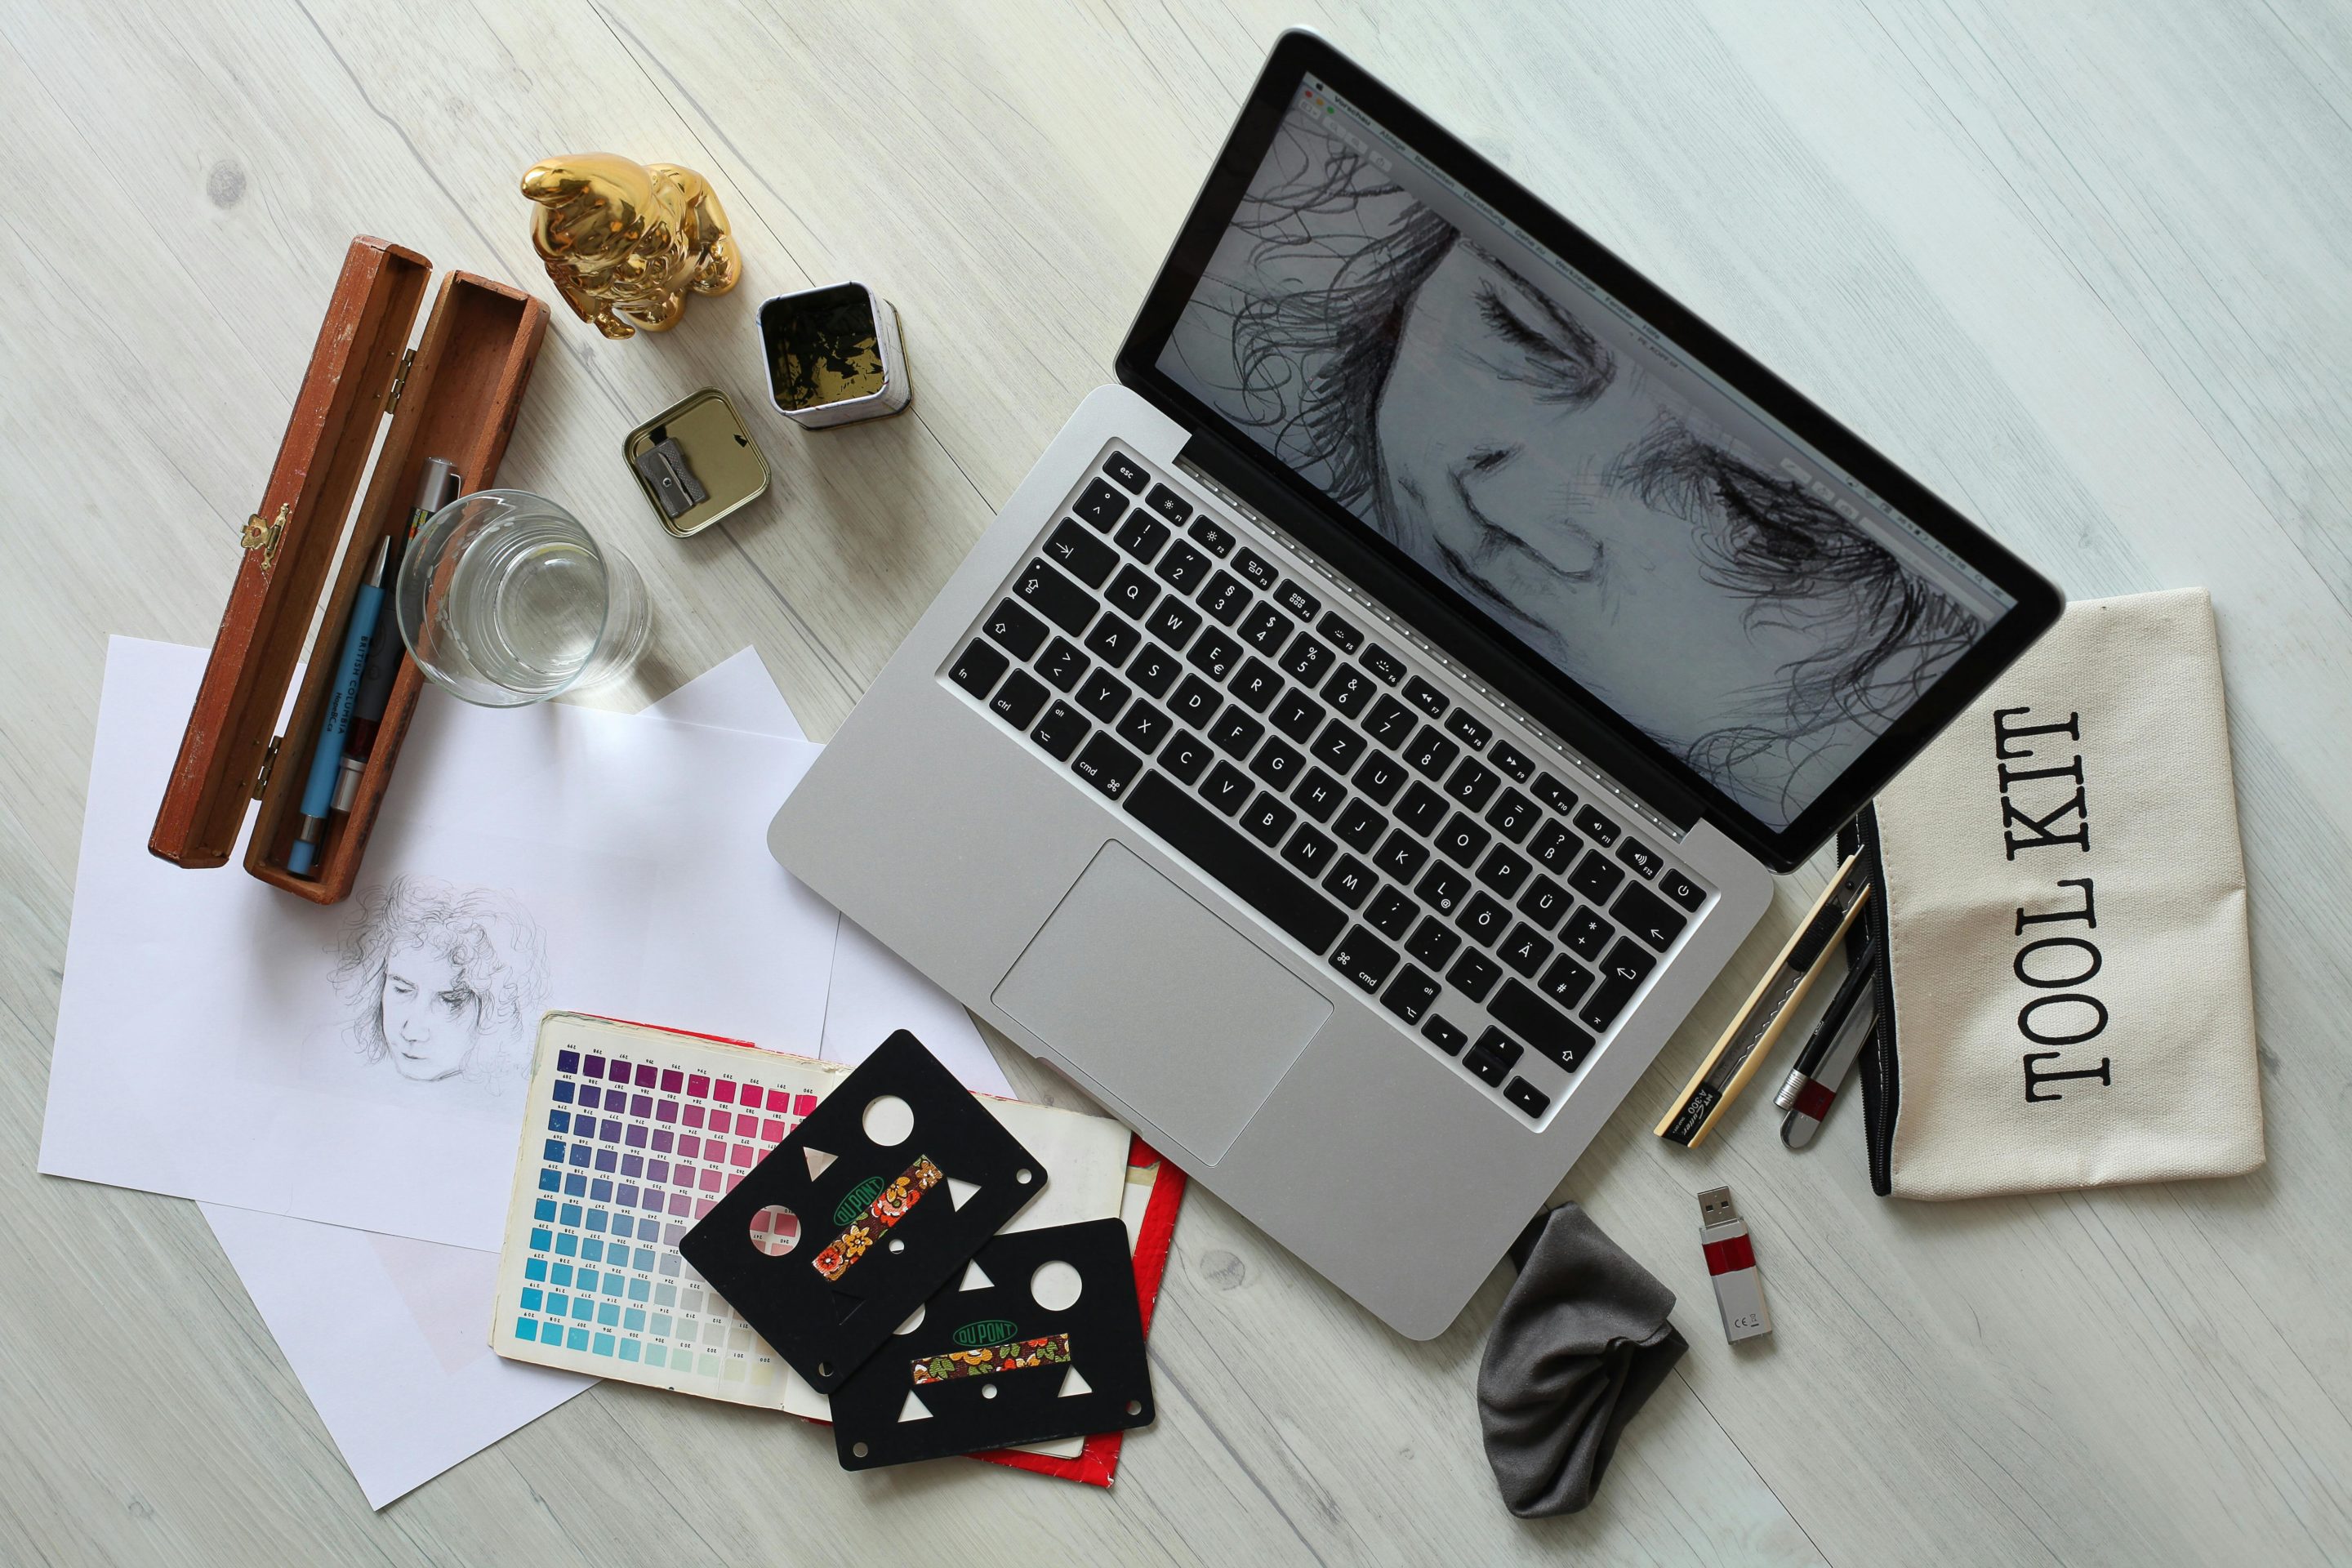 Overhead view of a creative workspace with an open laptop displaying a drawing, sketches, color swatches, and various art tools on a wooden surface.